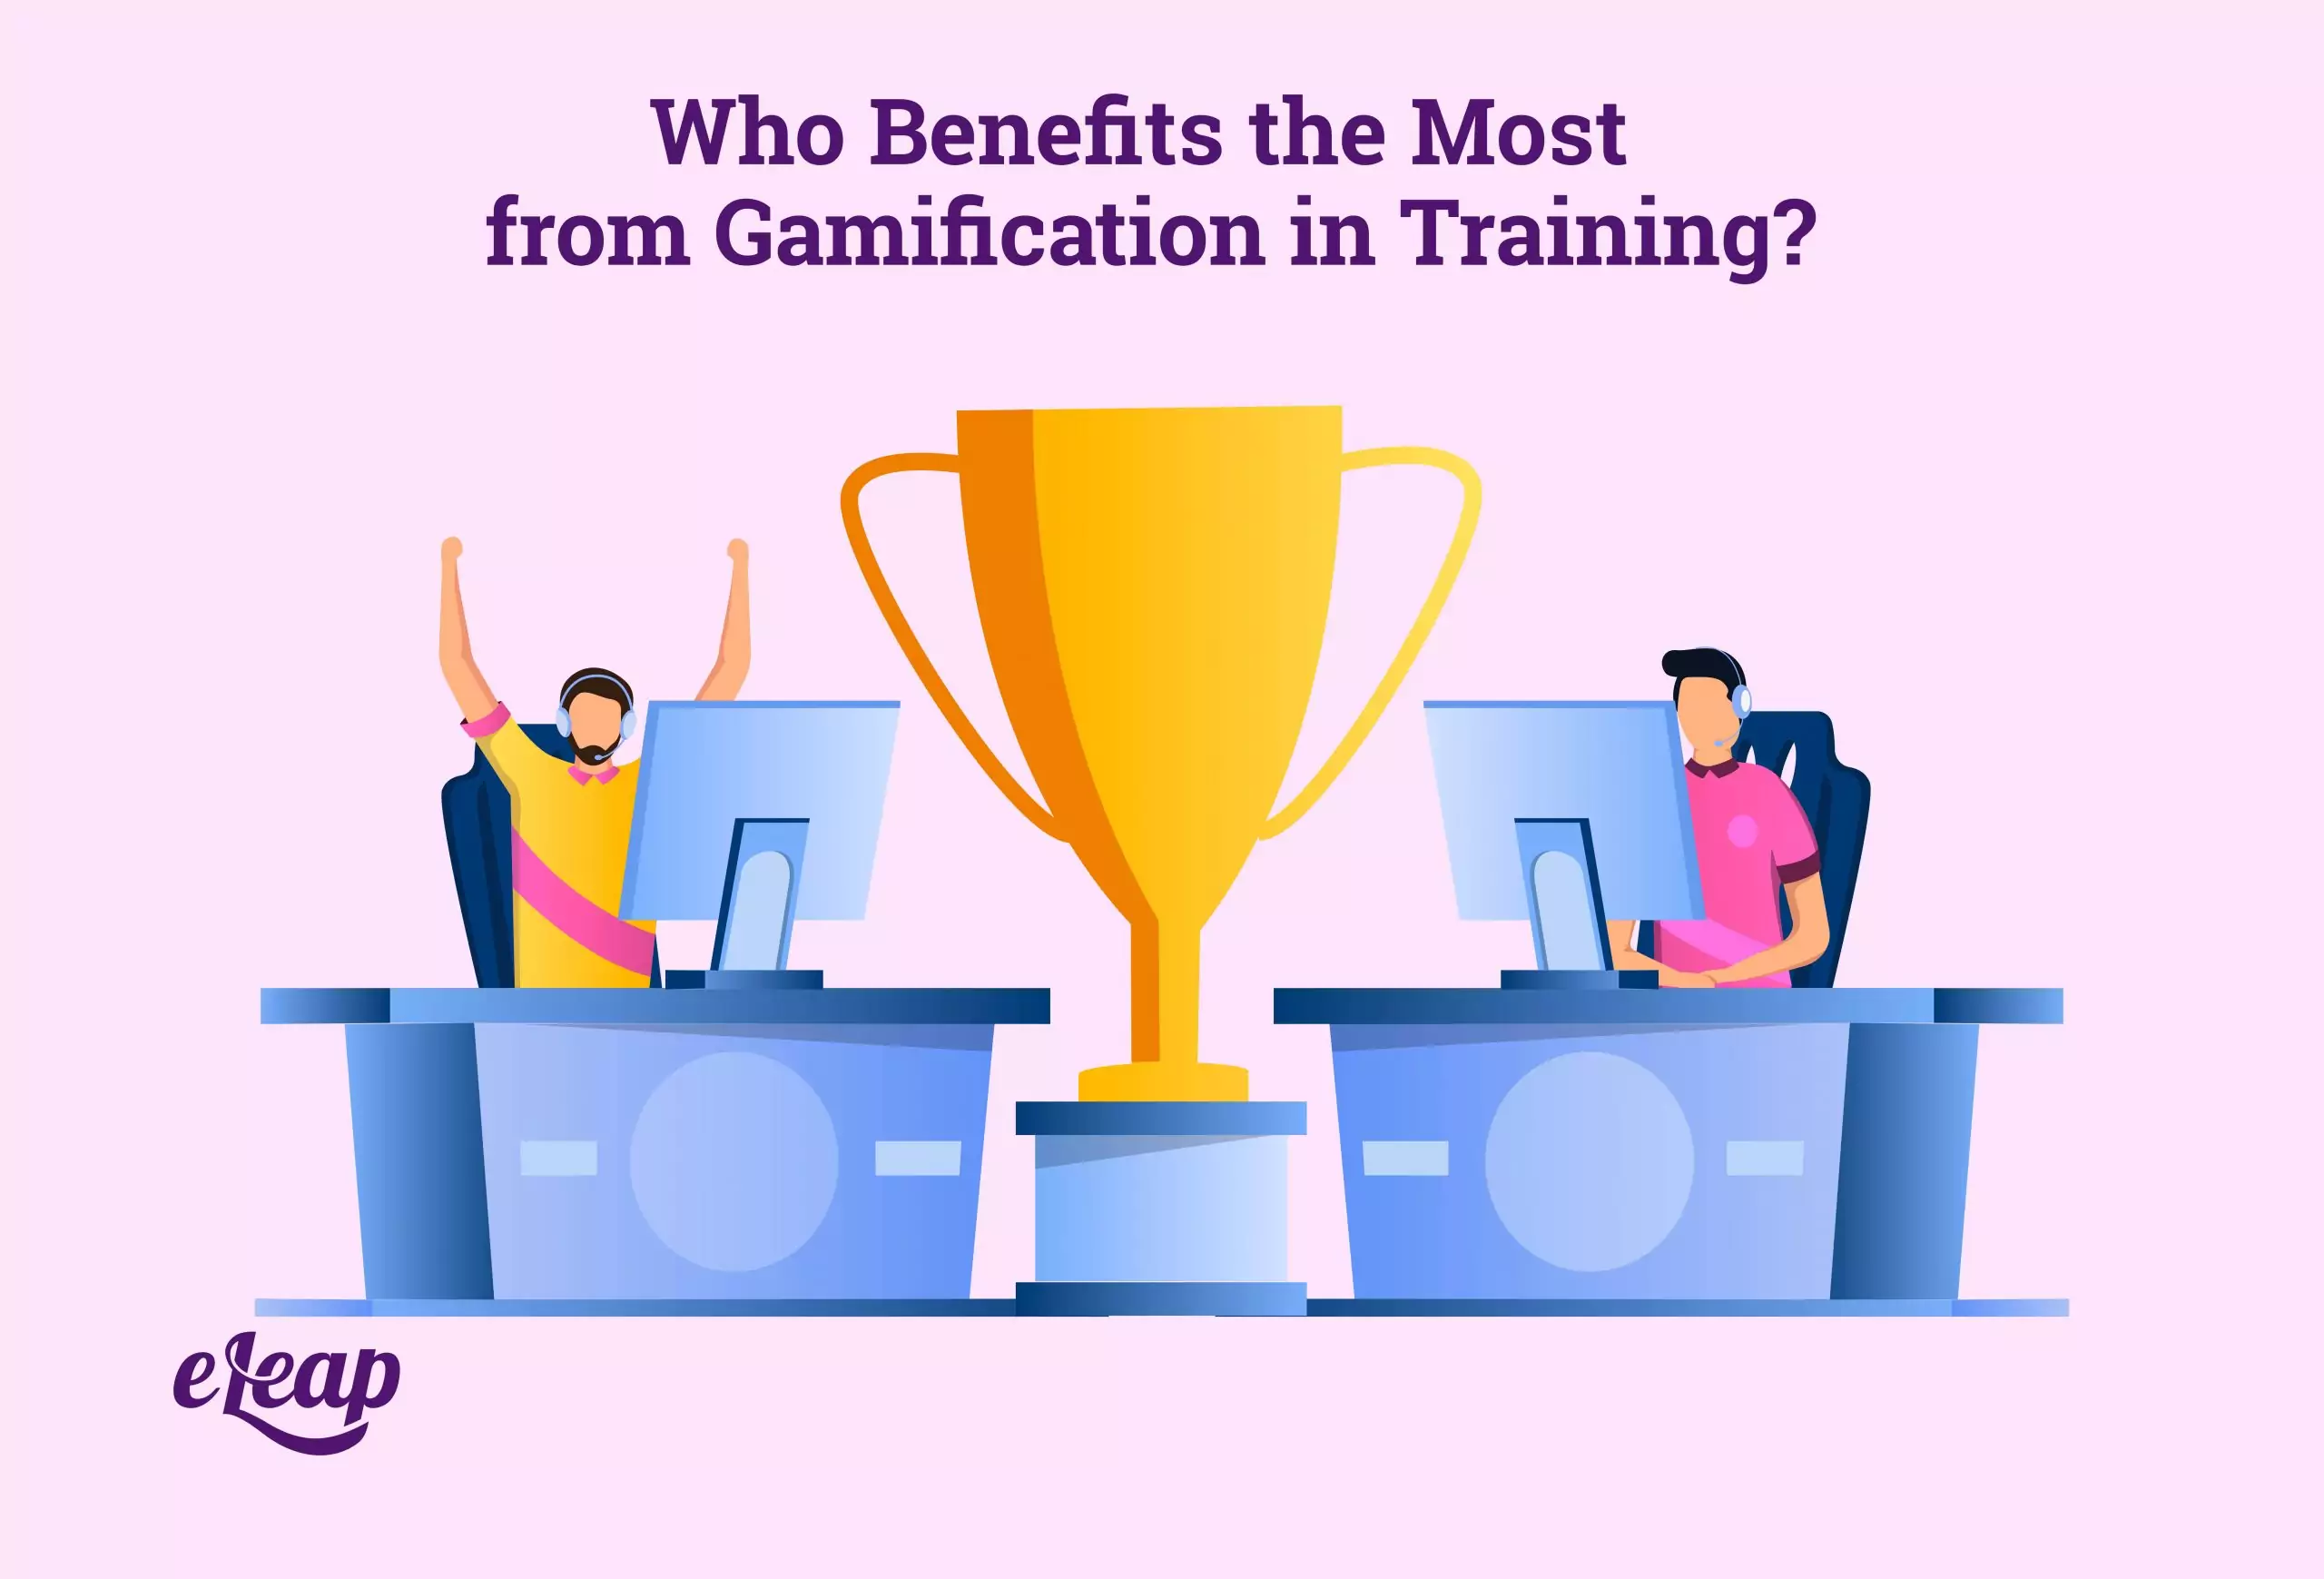 Who Benefits the Most from Gamification in Training?